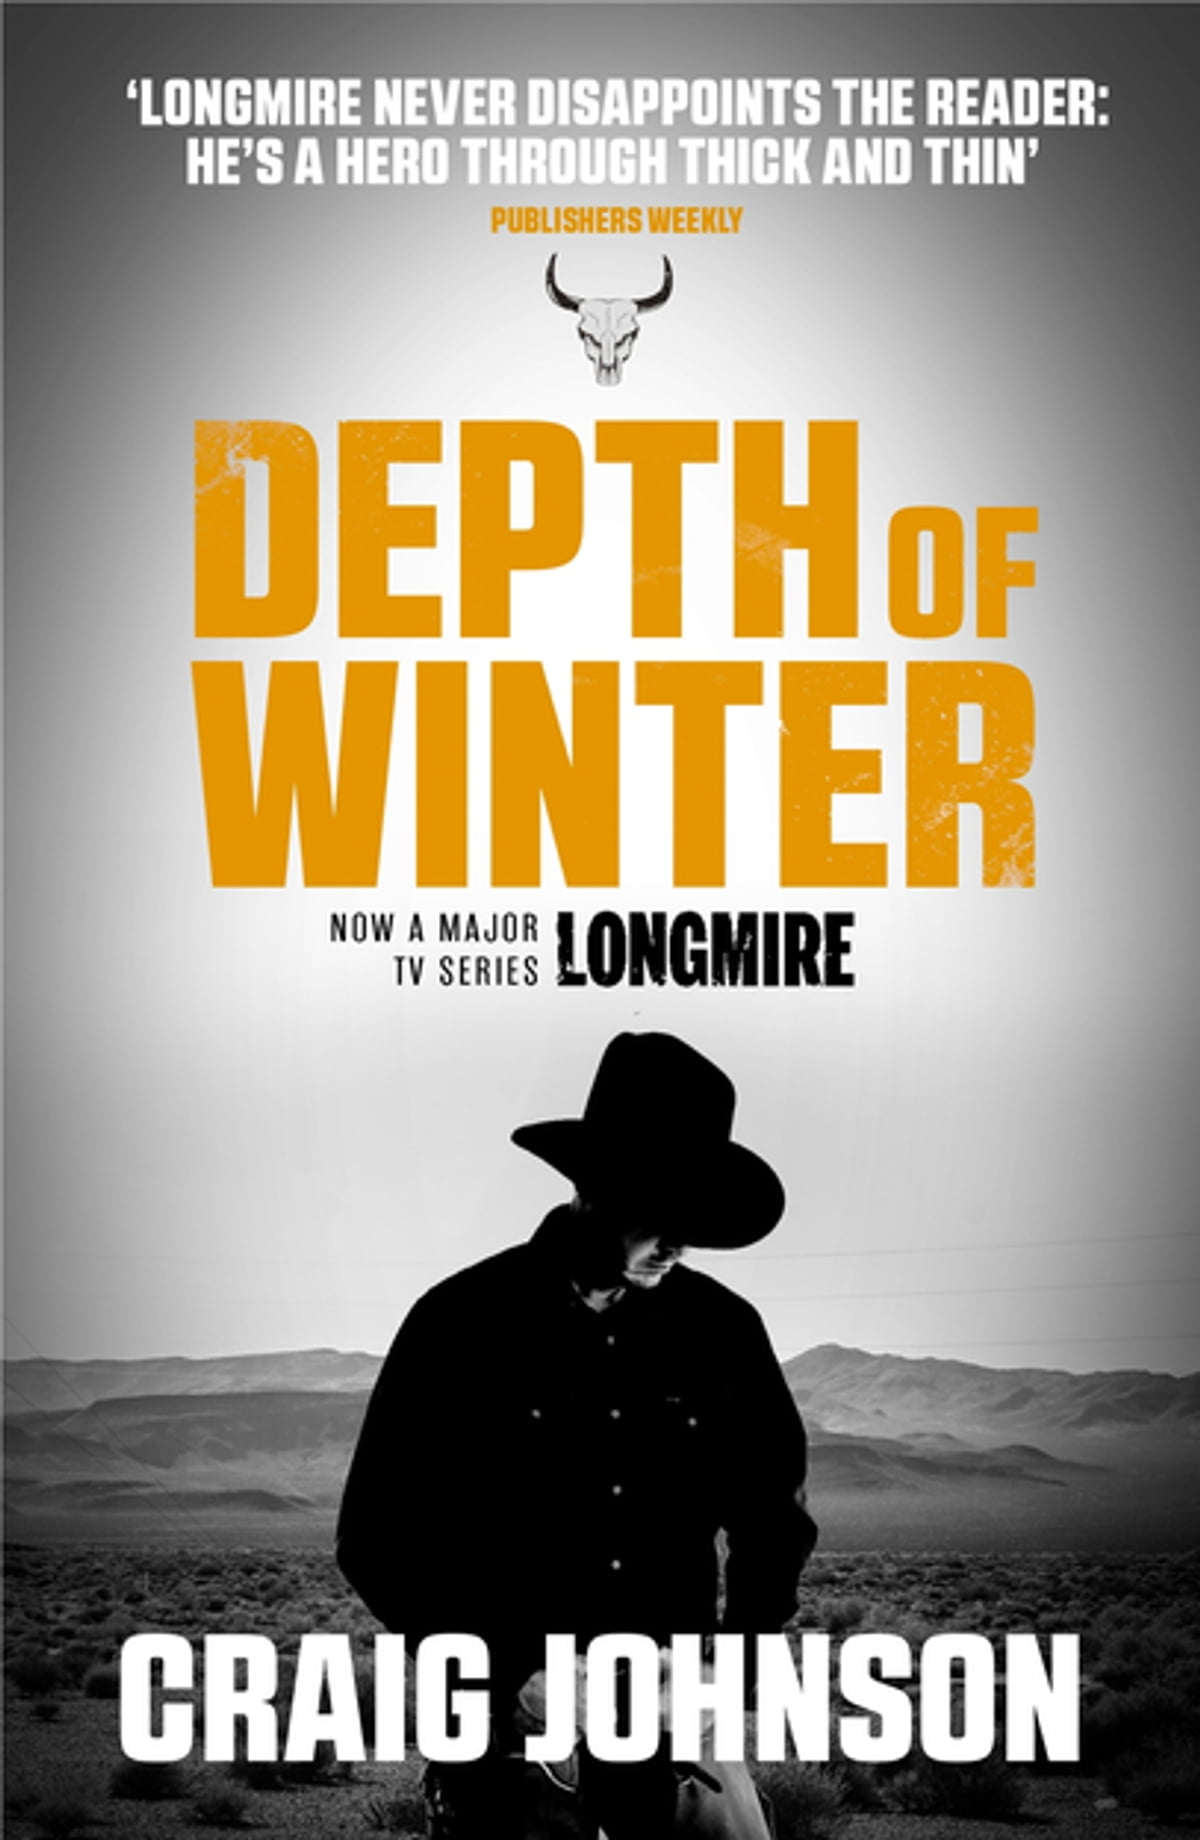 Book Cover of Depth of Winter by Craig Johnson